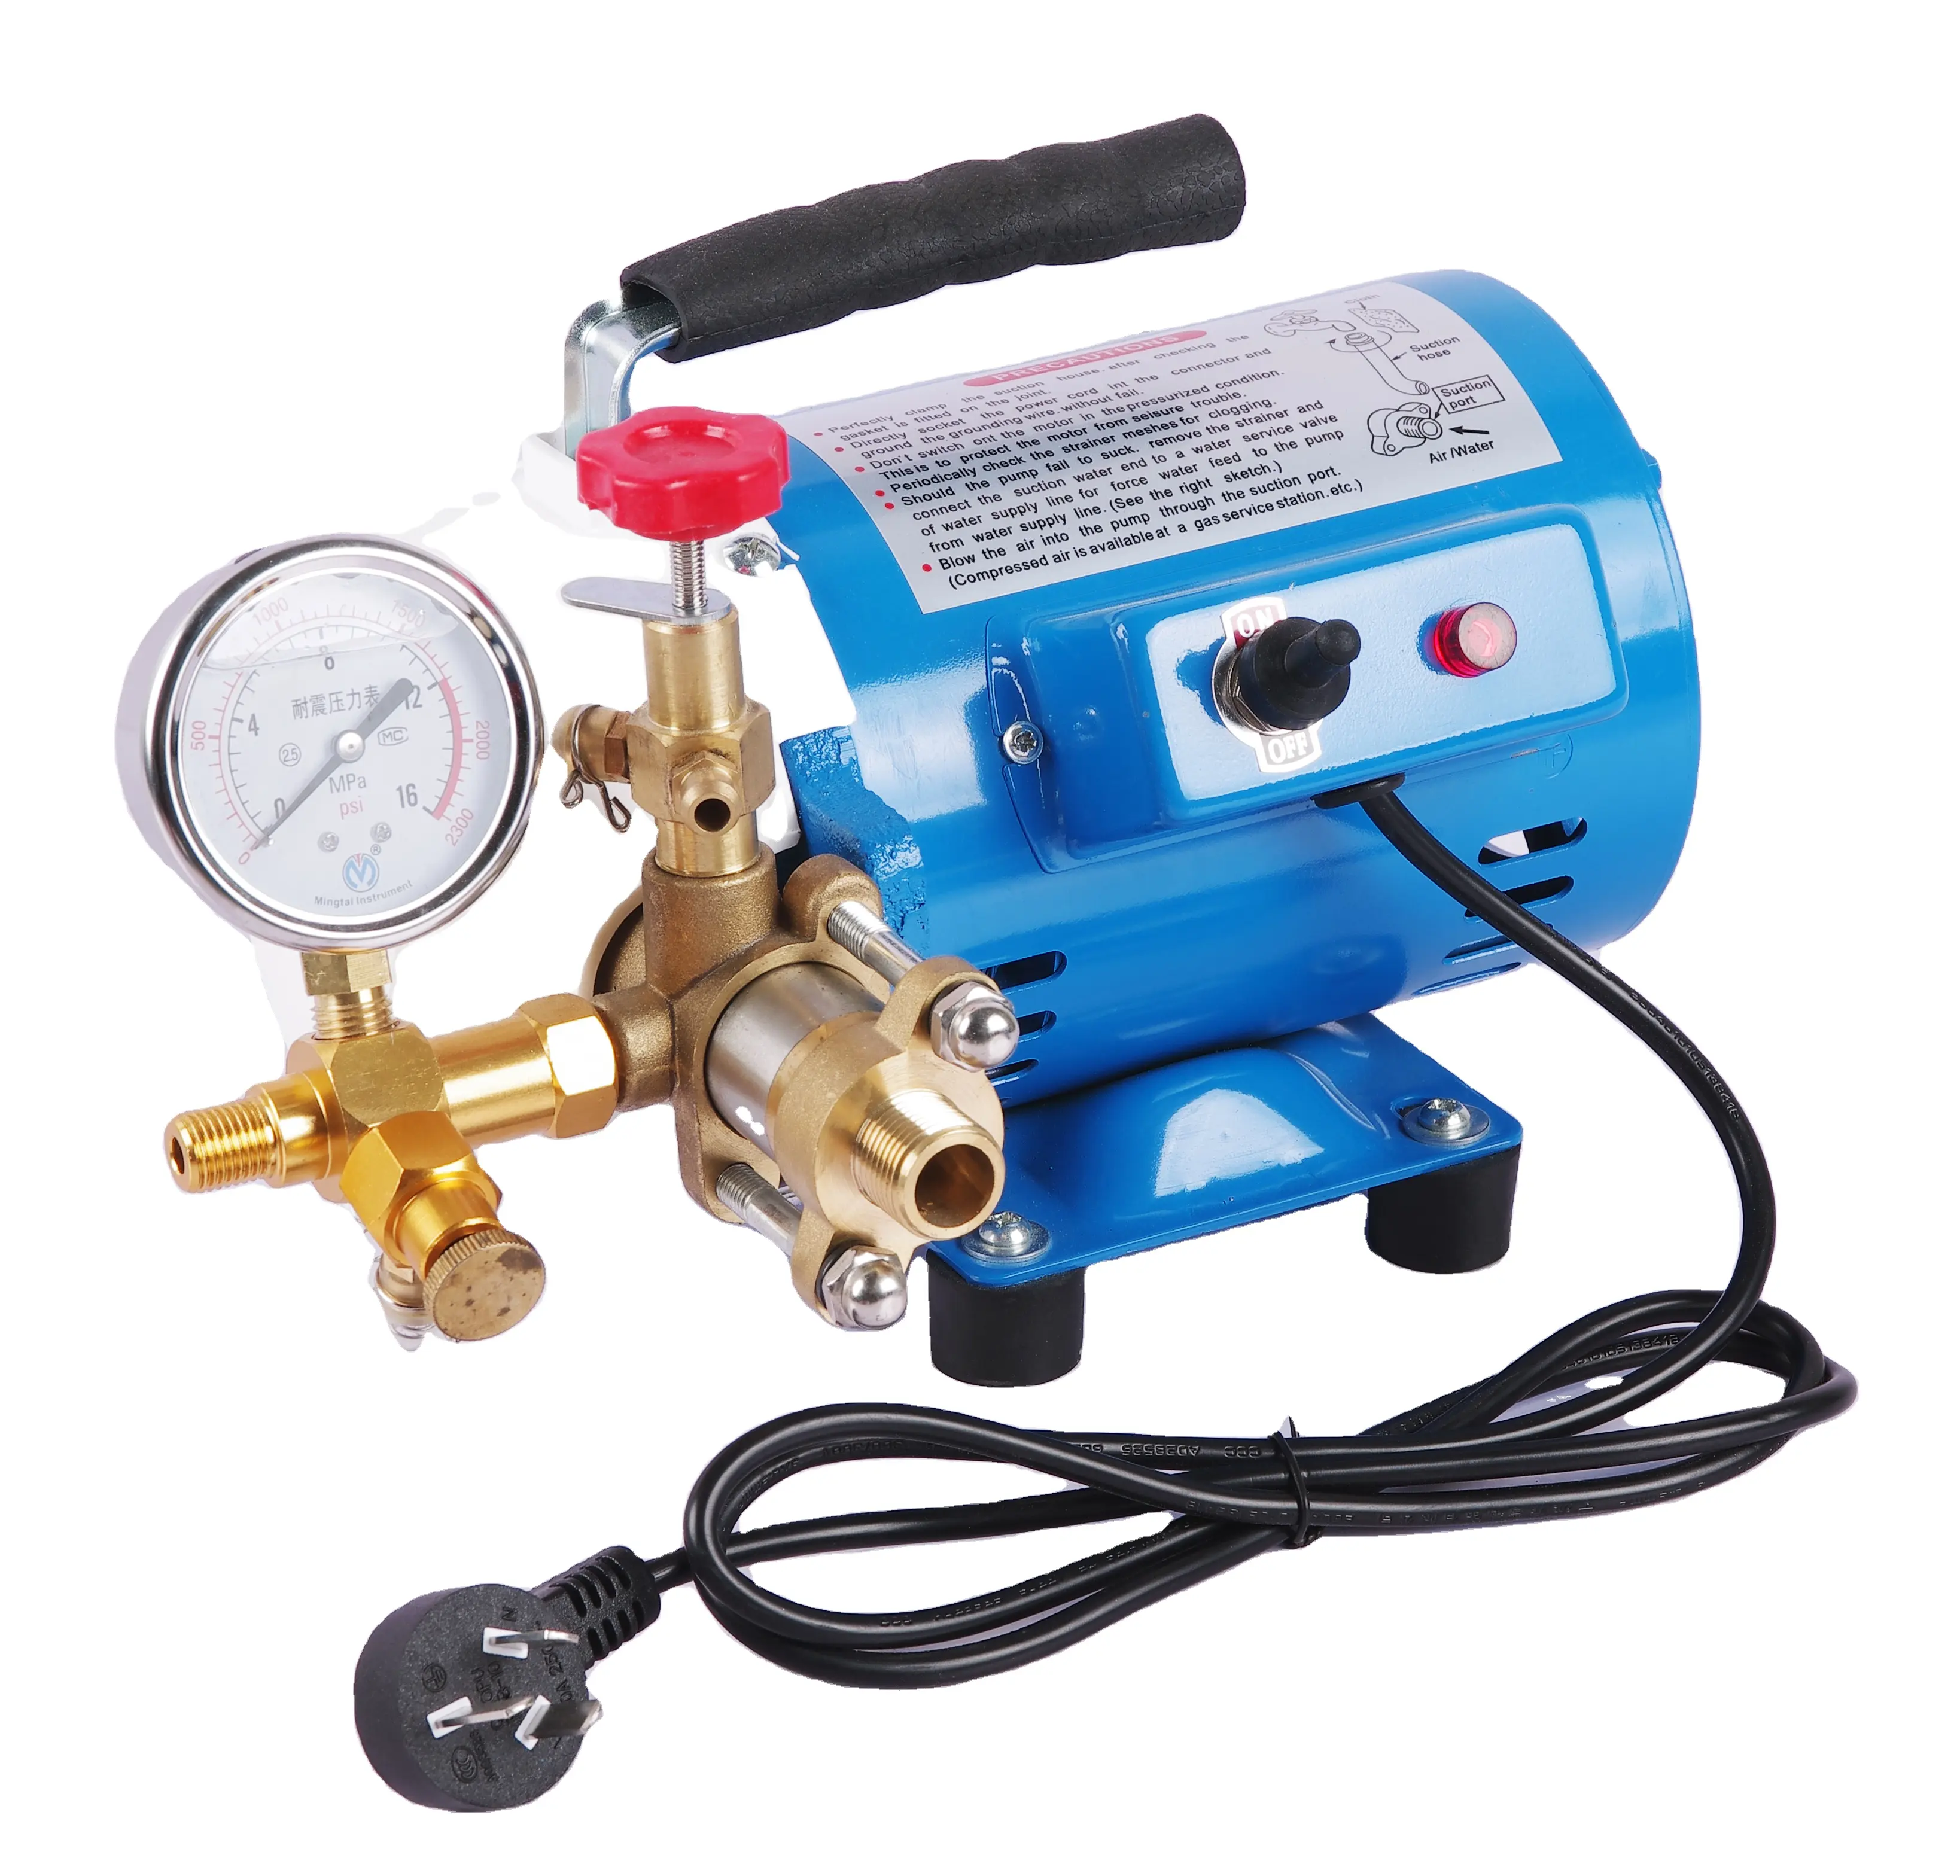 DSY-100 Plumbing tool water electric hydrostatic electrical hydro pipe testing bench high pressure test pump